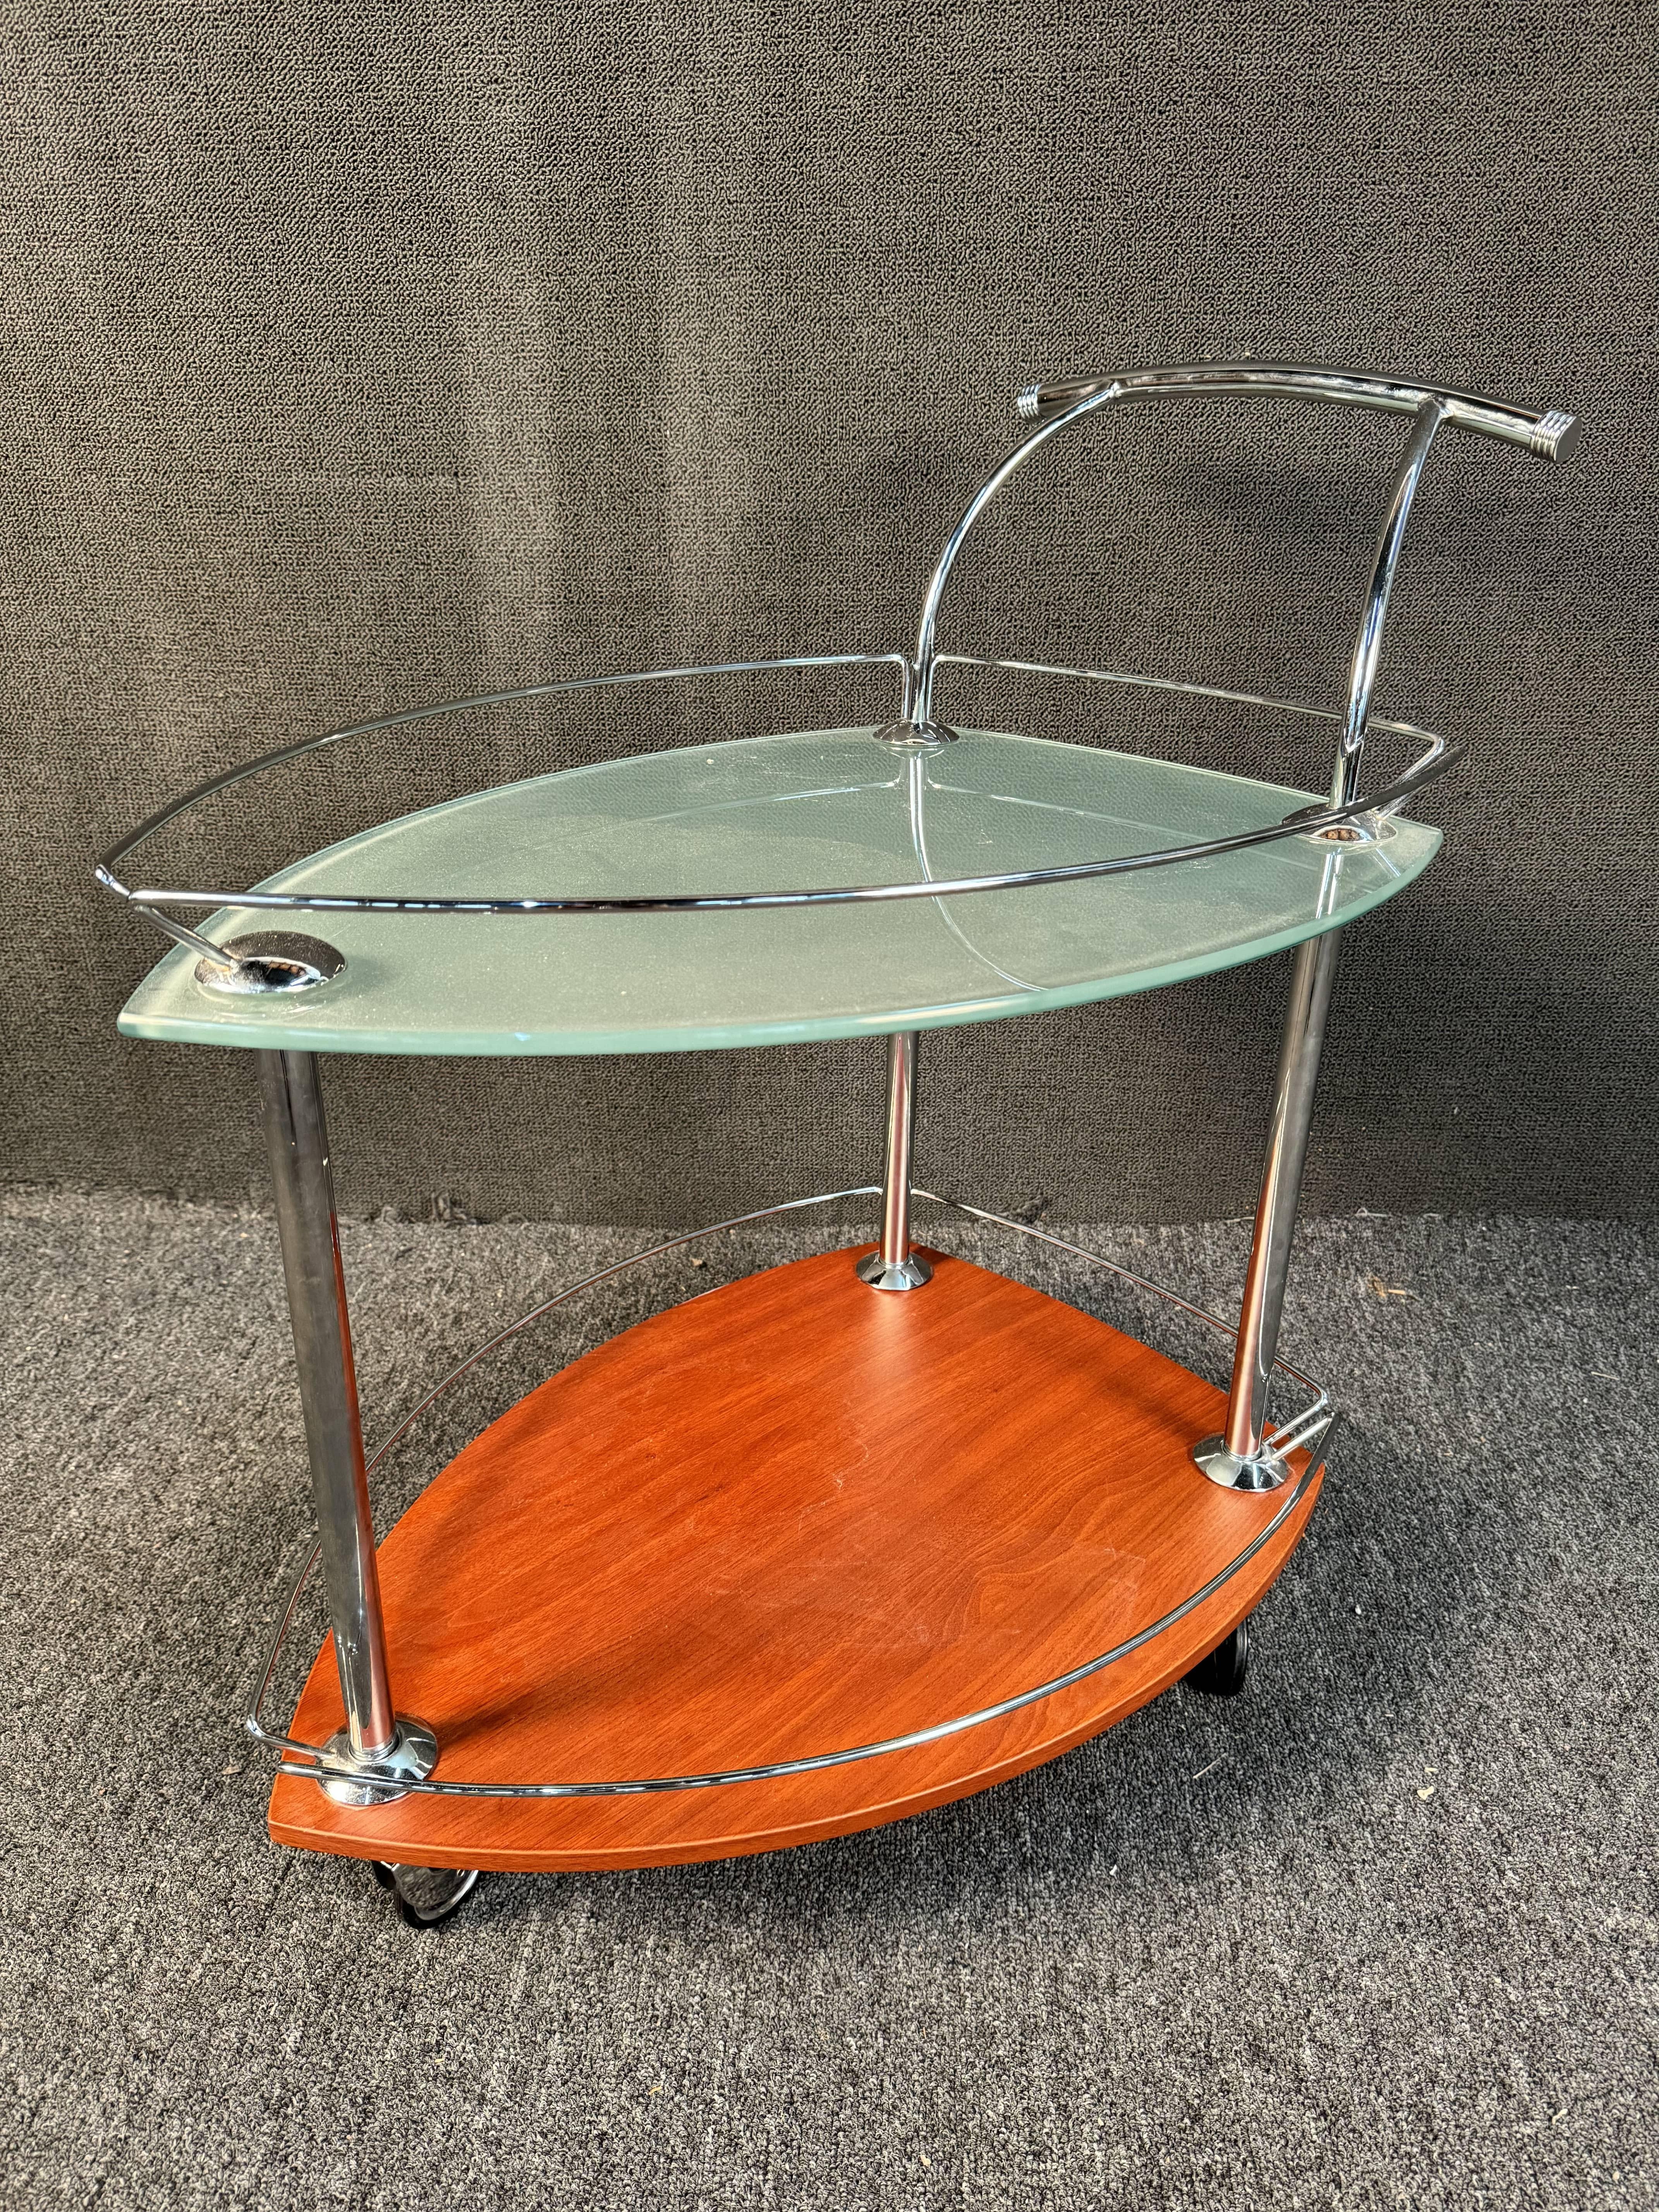 Unique triangular bar cart that features a tempered glass top, and wood bottom section. Perfect for entertaining your next cocktail party. Please contact dealer to confirm location (NY or NJ)

